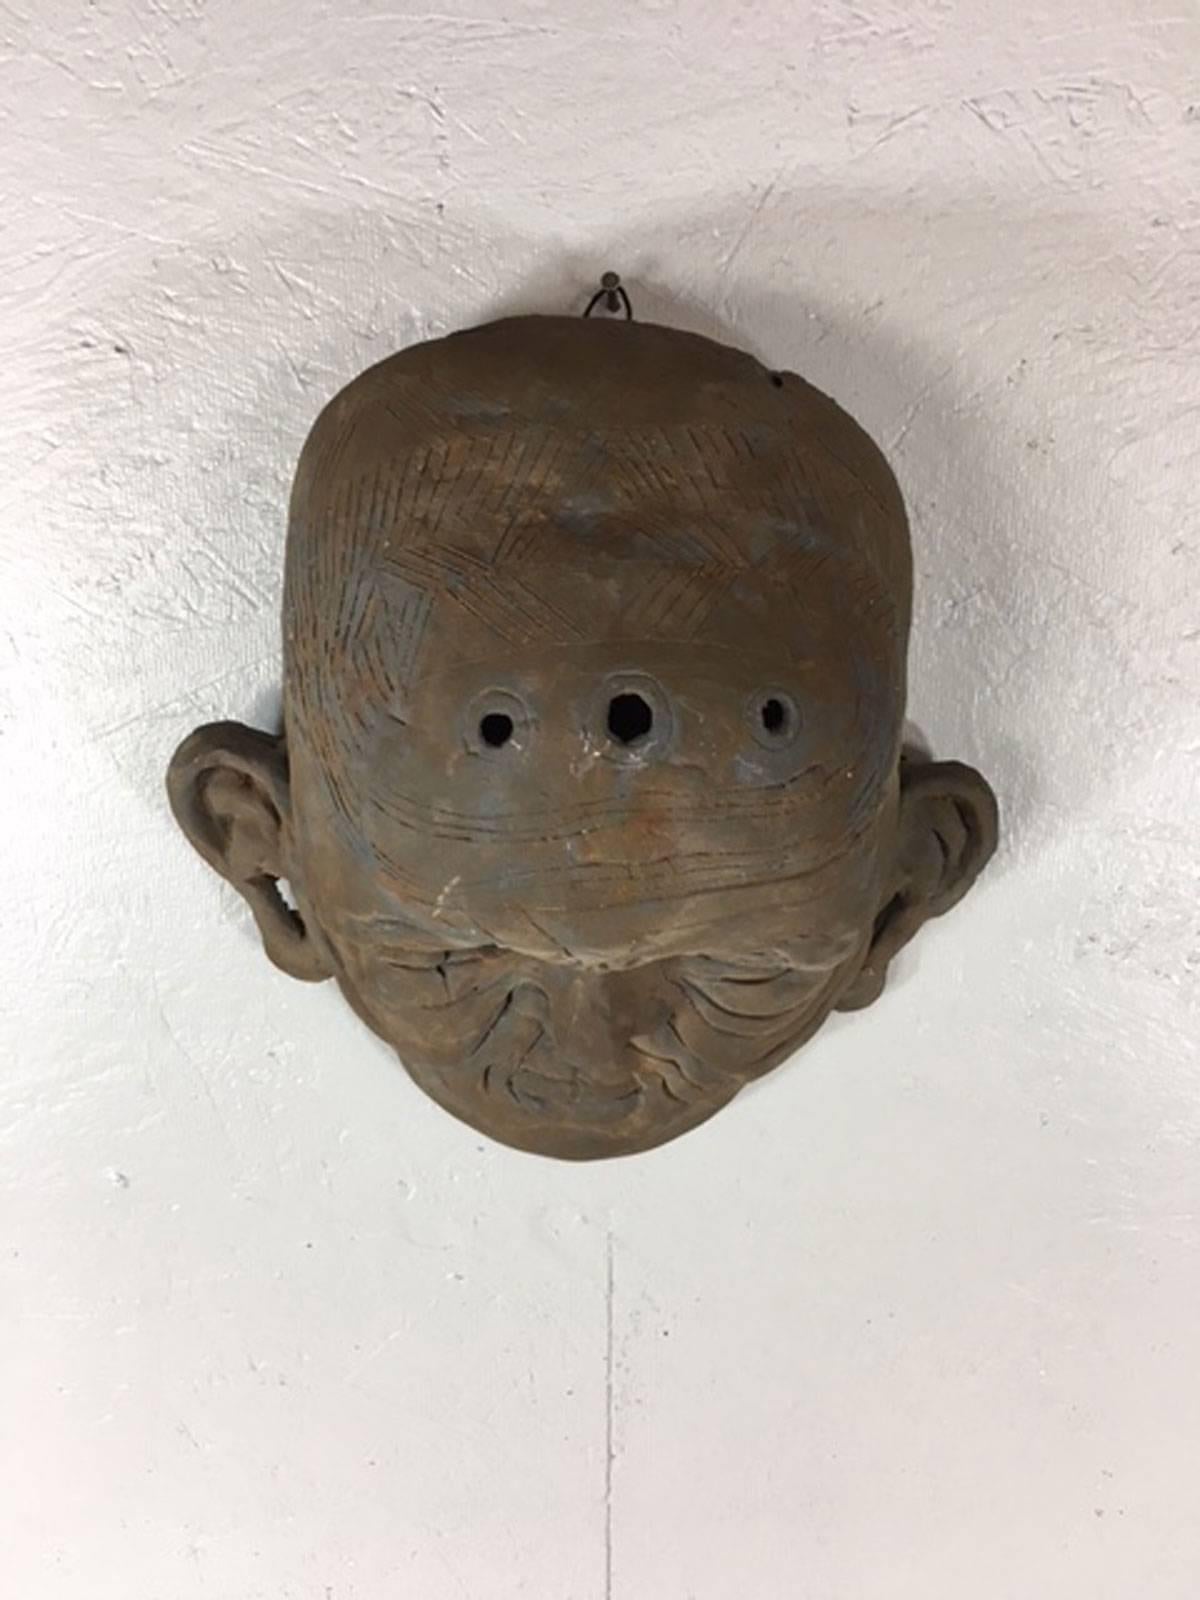 Epoxy Resin Sculpted Mask of a Face by Dale Edwards  For Sale